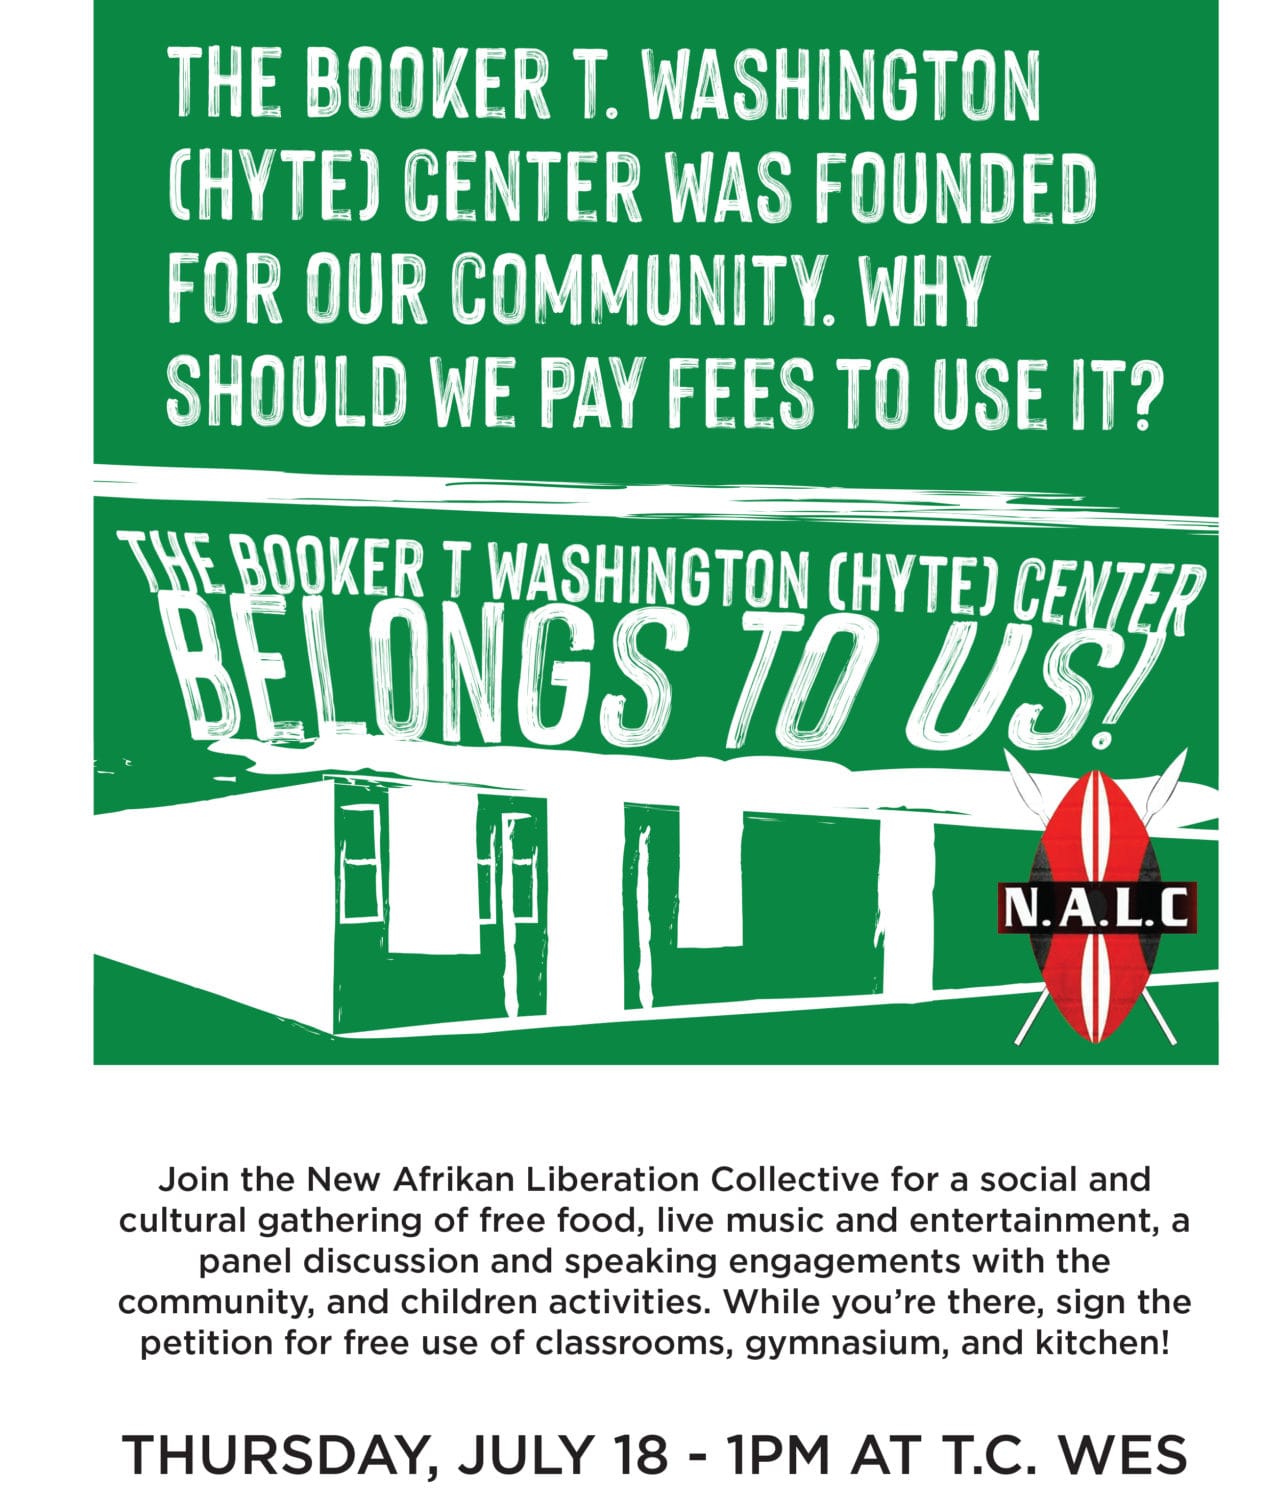 The-Booker-T.-Washington-Center-belongs-to-us-NALC-poster-for-Peoples-Assembly-Terre-Haute-071820, Second annual People’s Assembly: Revolution vs. reactionary reformism, Behind Enemy Lines 